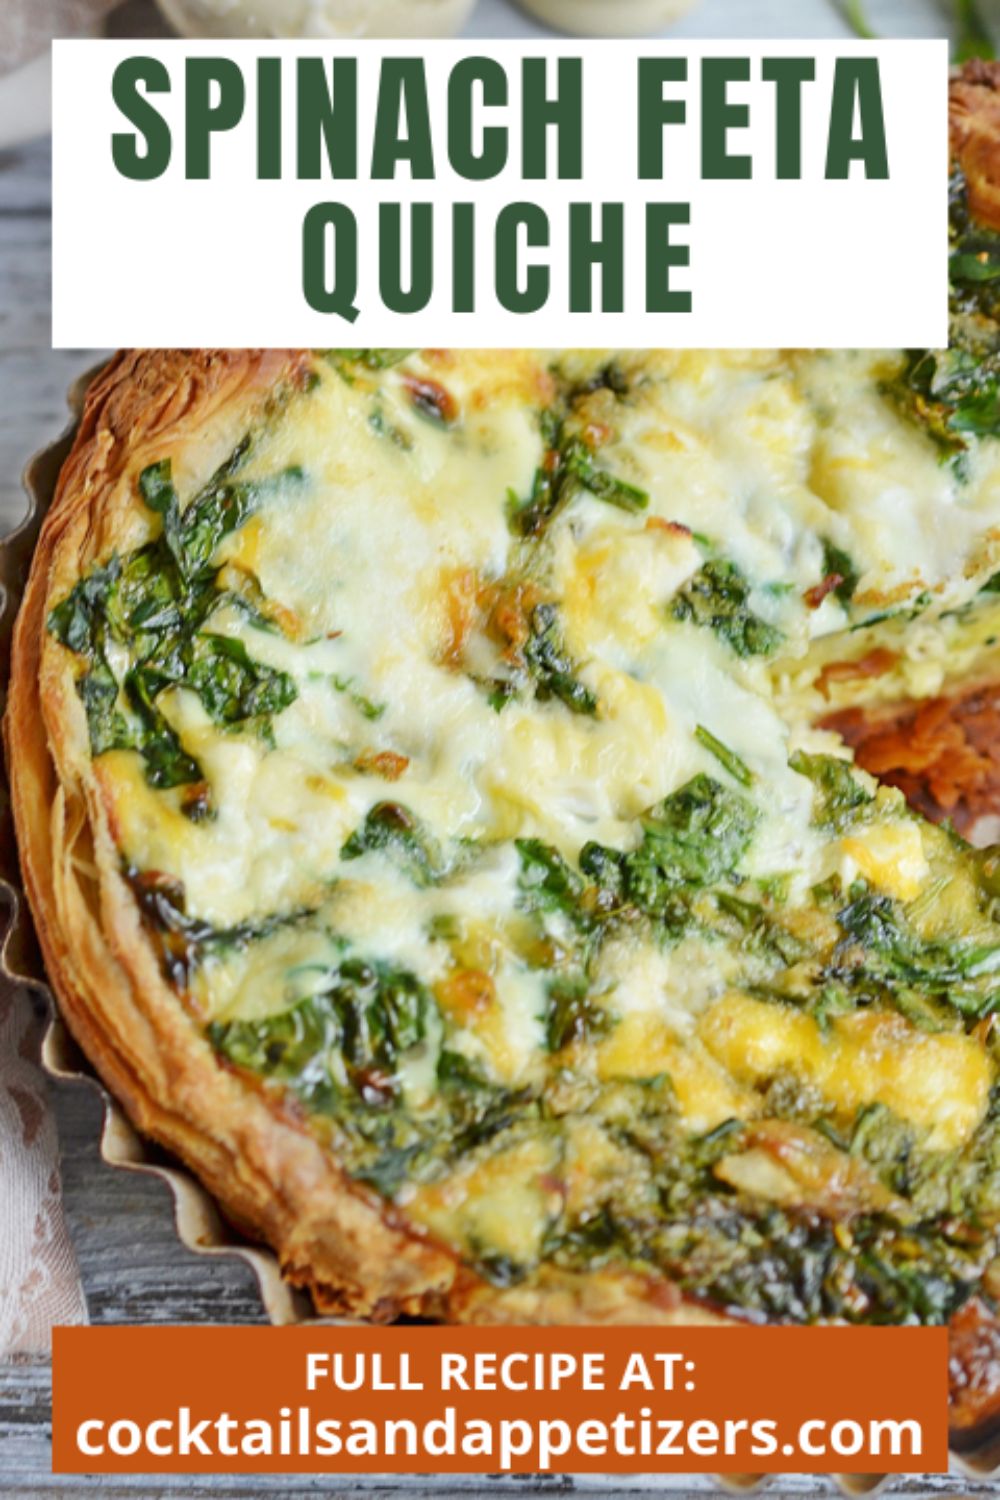 Spinach Feta Quiche baked in a pan